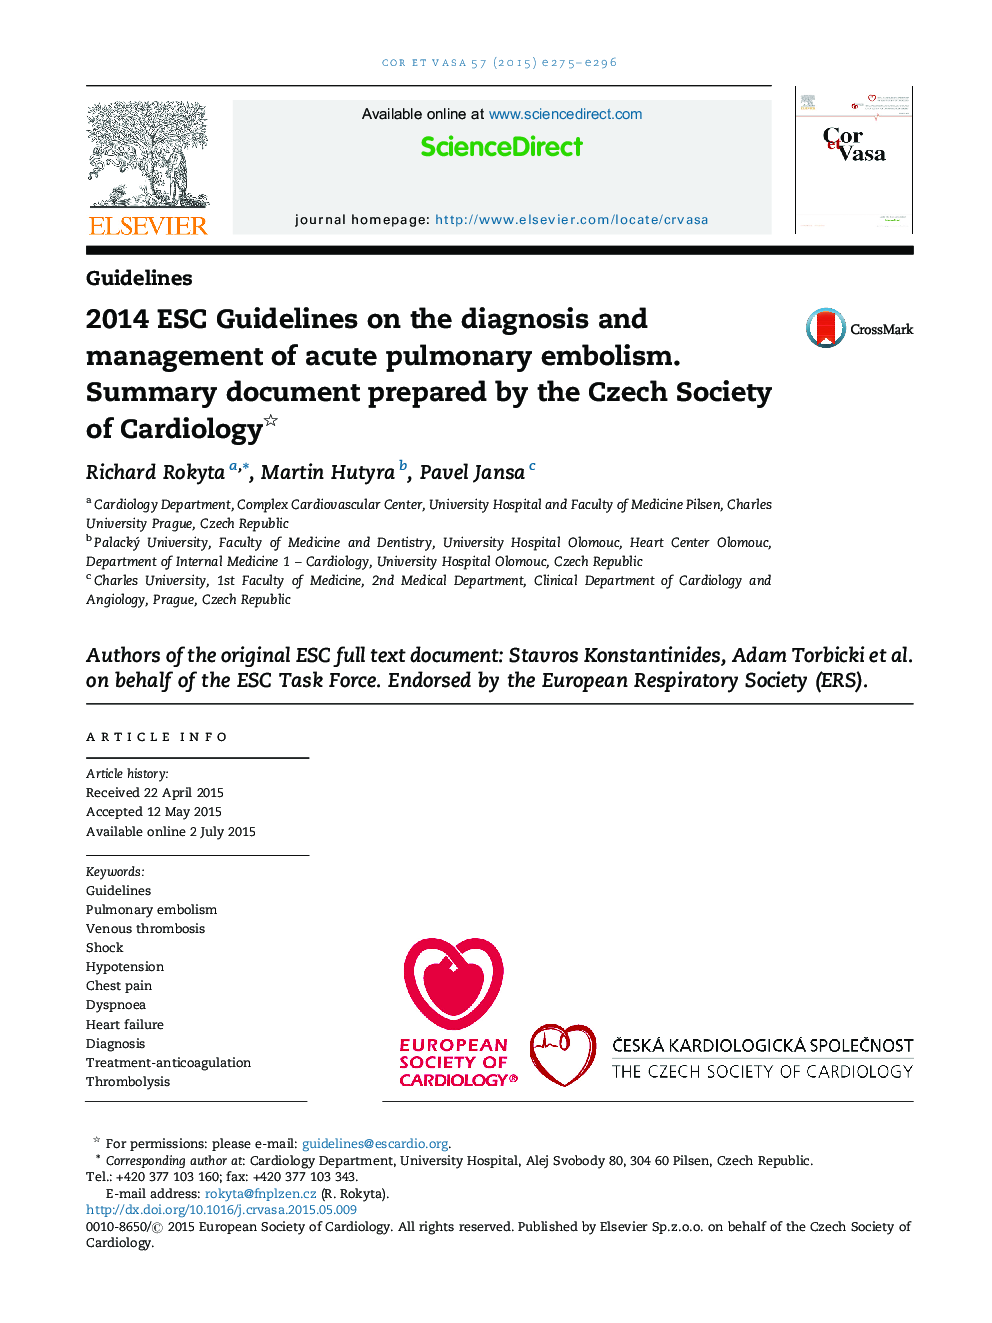 2014 ESC Guidelines on the diagnosis and management of acute pulmonary embolism. Summary document prepared by the Czech Society of Cardiology